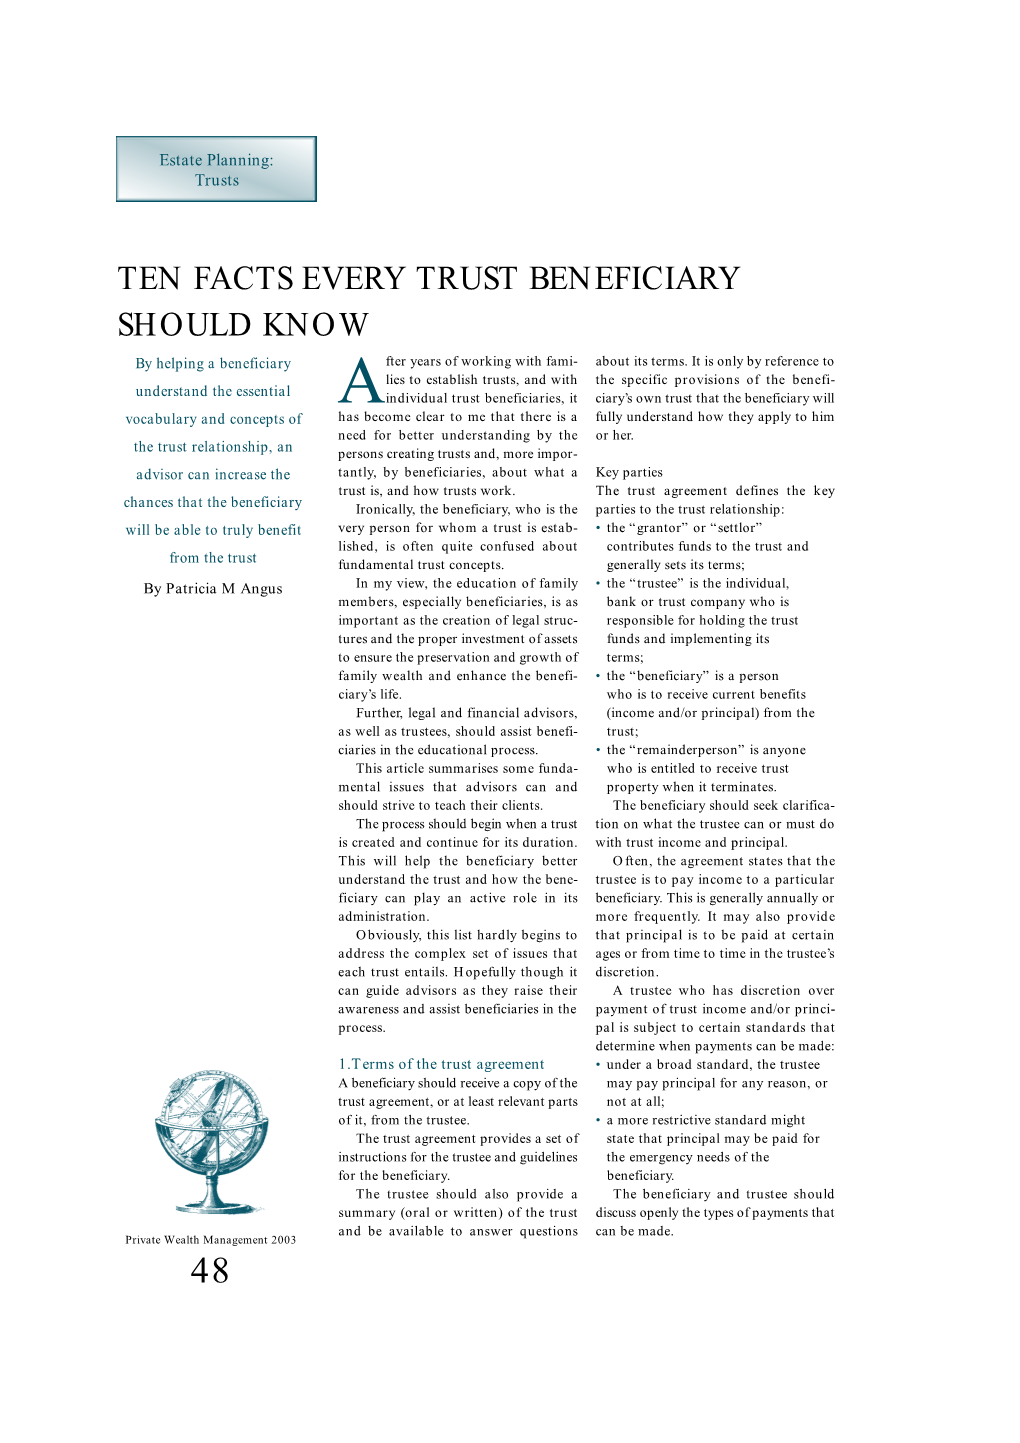 TEN FACTS EVERY TRUST BENEFICIARY SHOULD KNOW by Helping a Beneficiary Fter Years of Working with Fami- About Its Terms